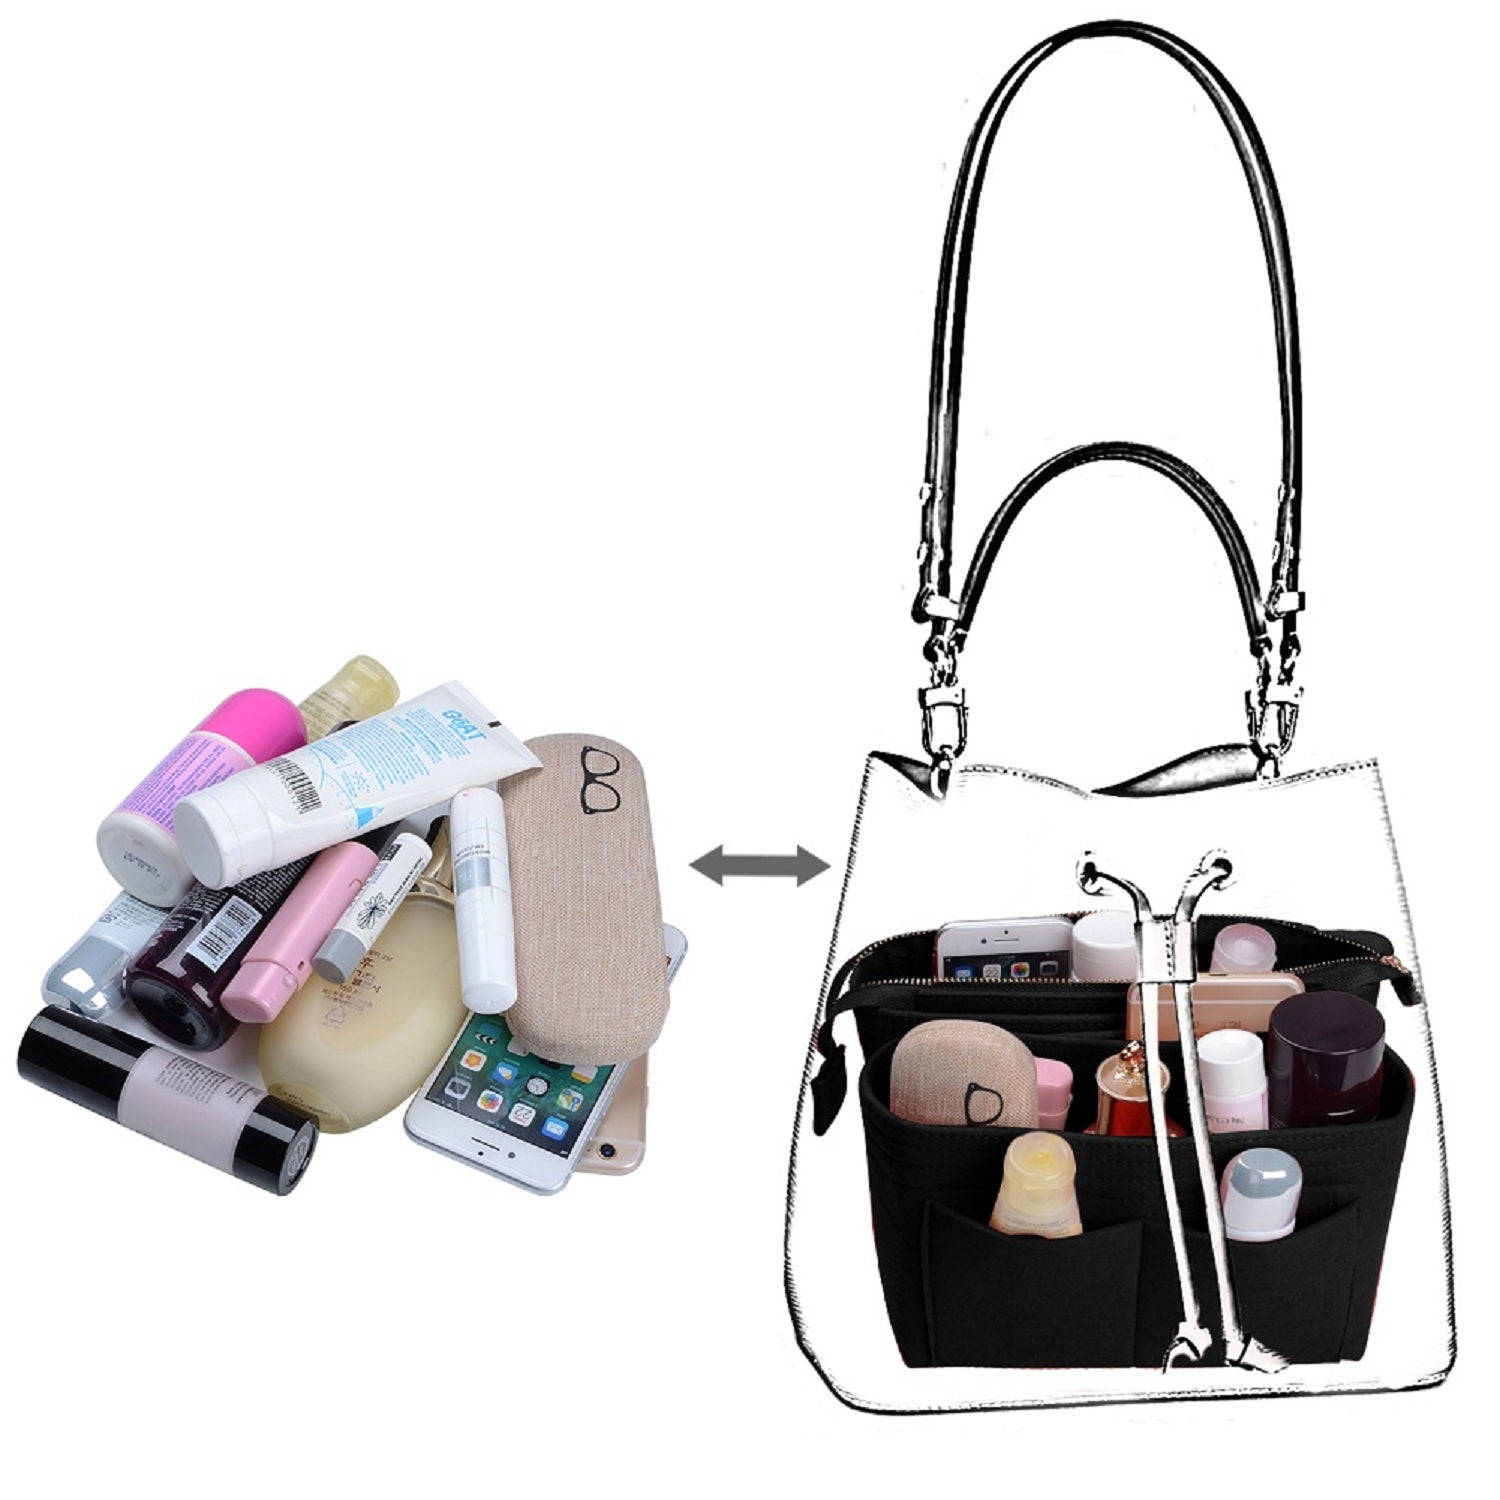 Purse Organizer, Bag in Ba Perfectly Structured Purse Organizer: Bag in Bag Organizer with Two Packs in One Set for LV NeoNoe Noé Seriesg Organizer With 2 Packs In One Set For LV NeoNoe Noé Series perfectly